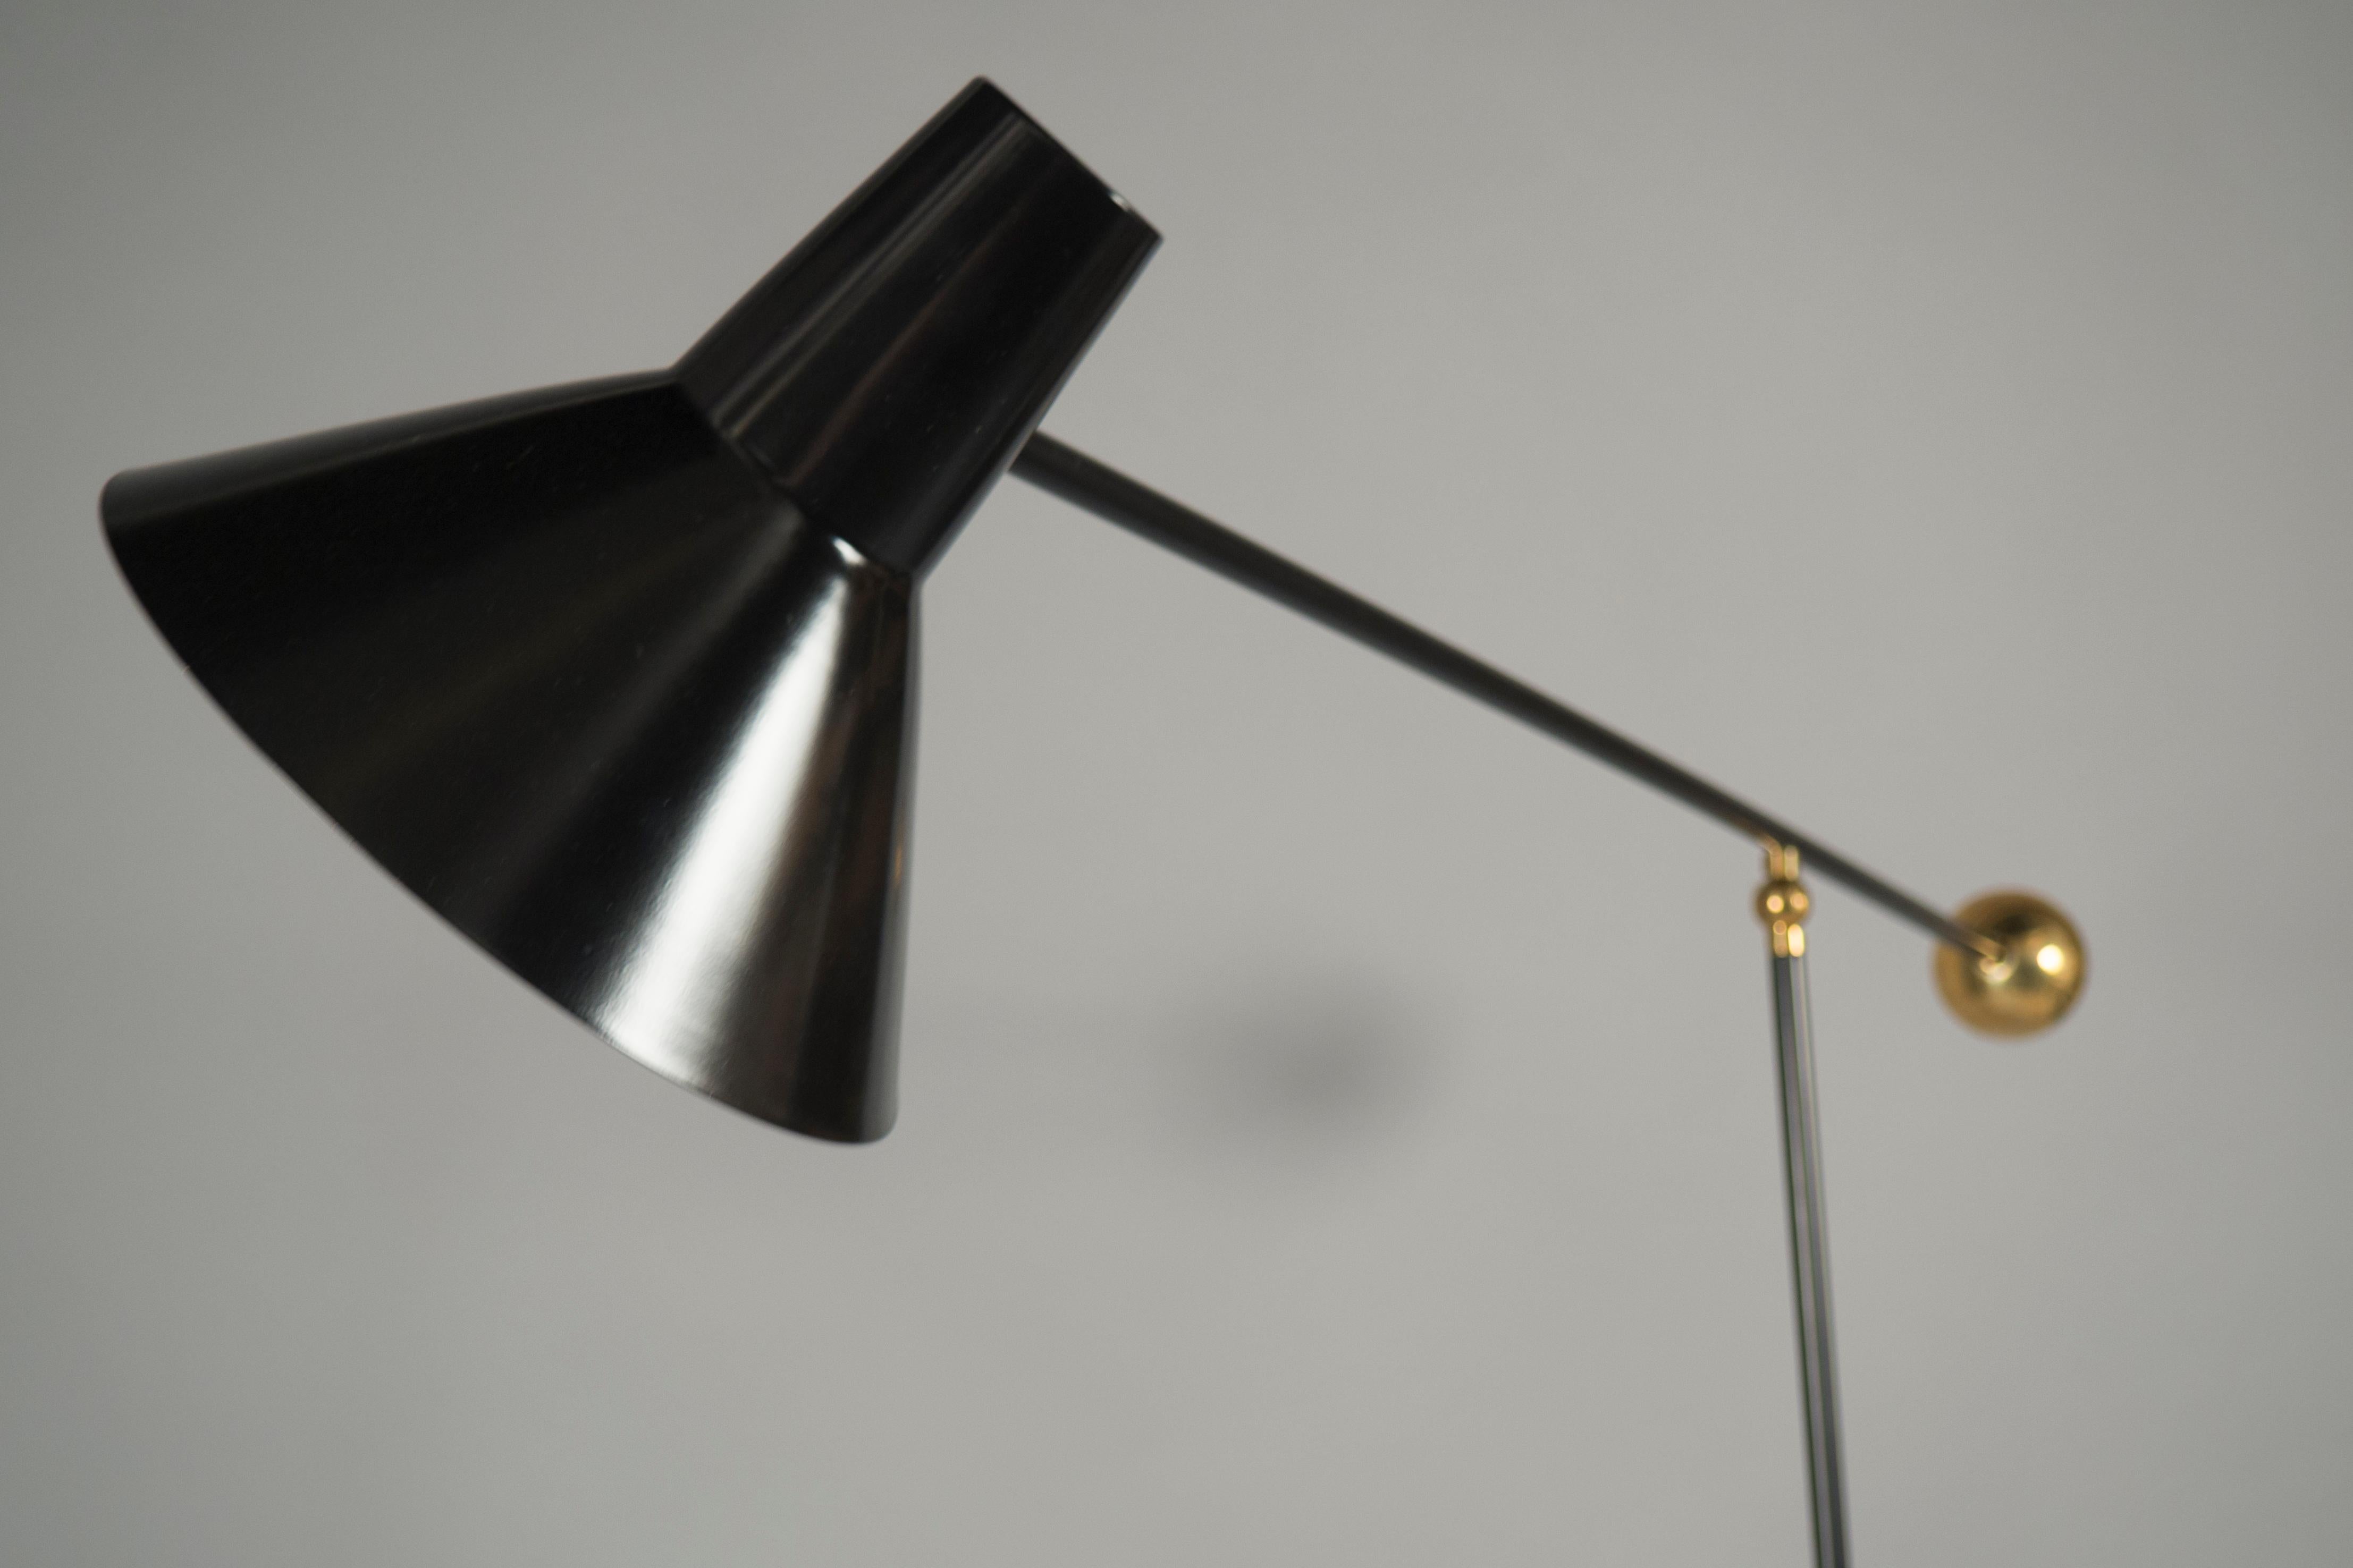 Black painted and polished brass floor lamp, featuring a conical shade balanced by a counterweight.


Size is adjustable:
Height 61-88”, width 22”, depth 18-52”.